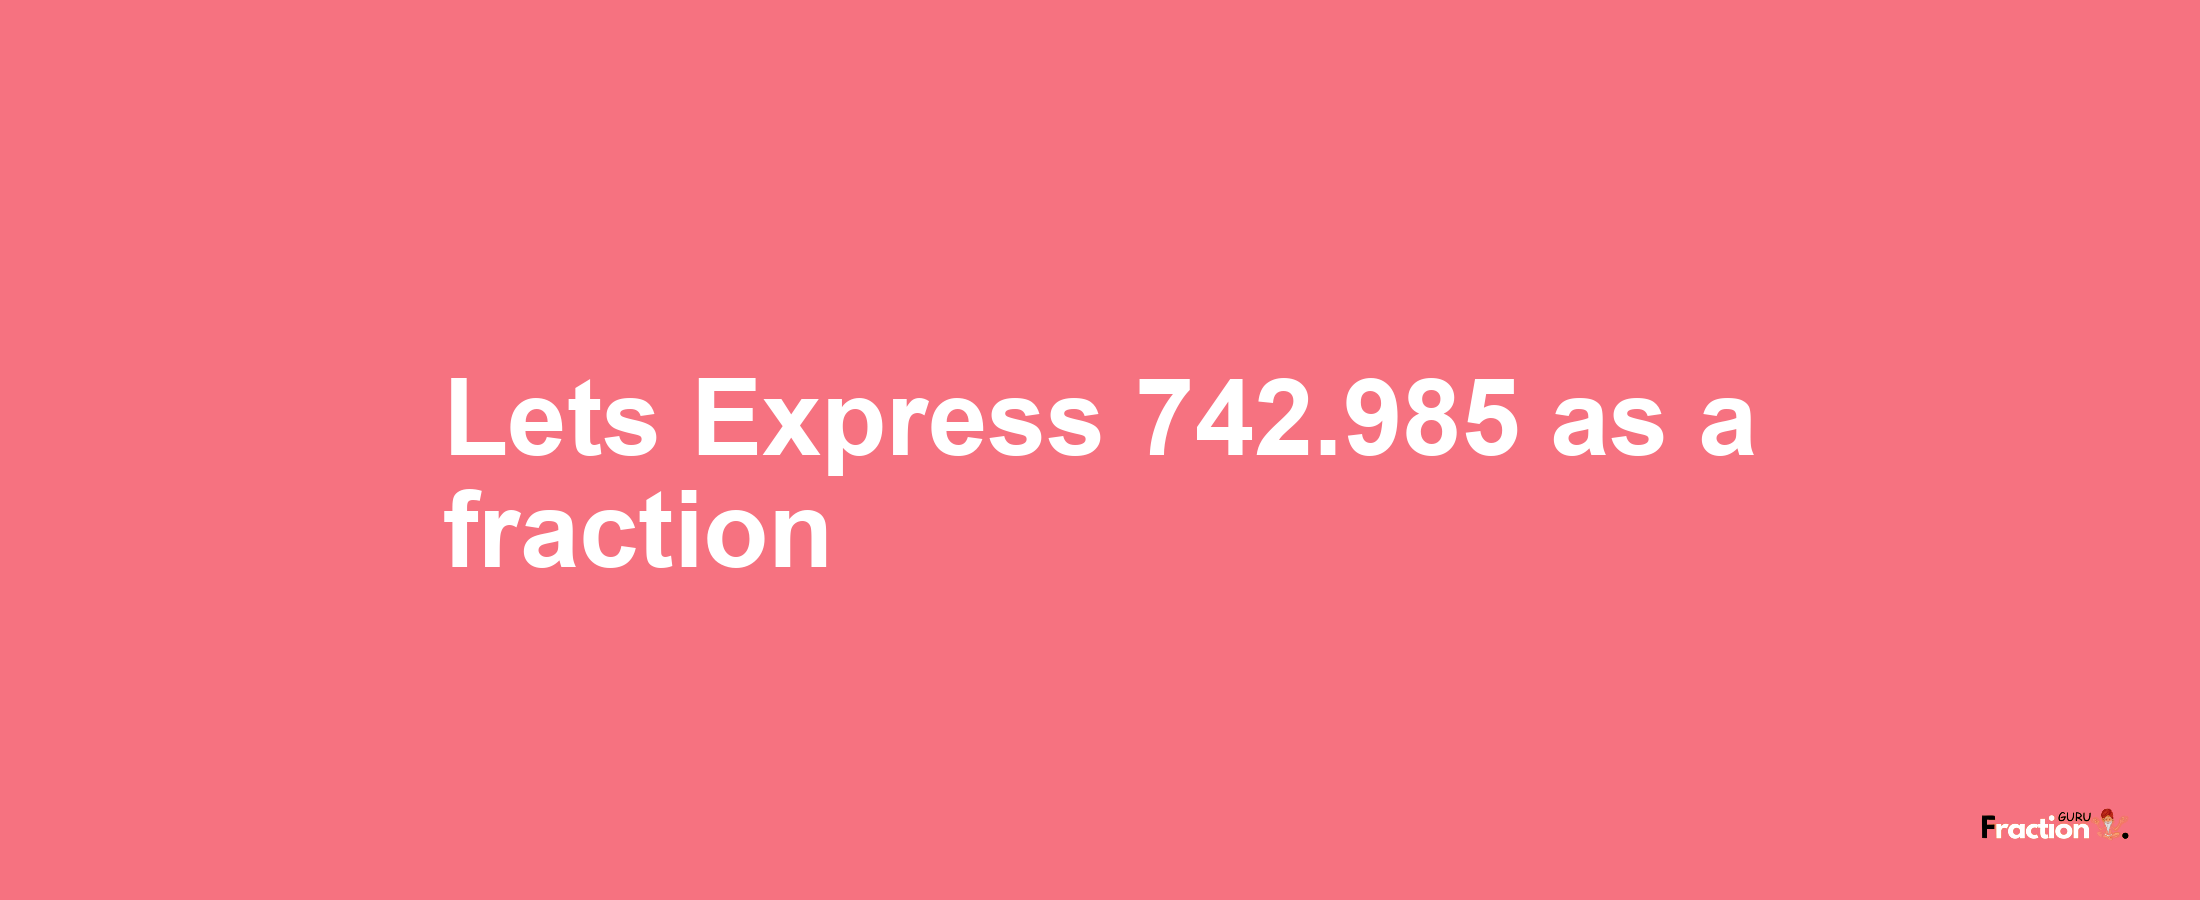 Lets Express 742.985 as afraction